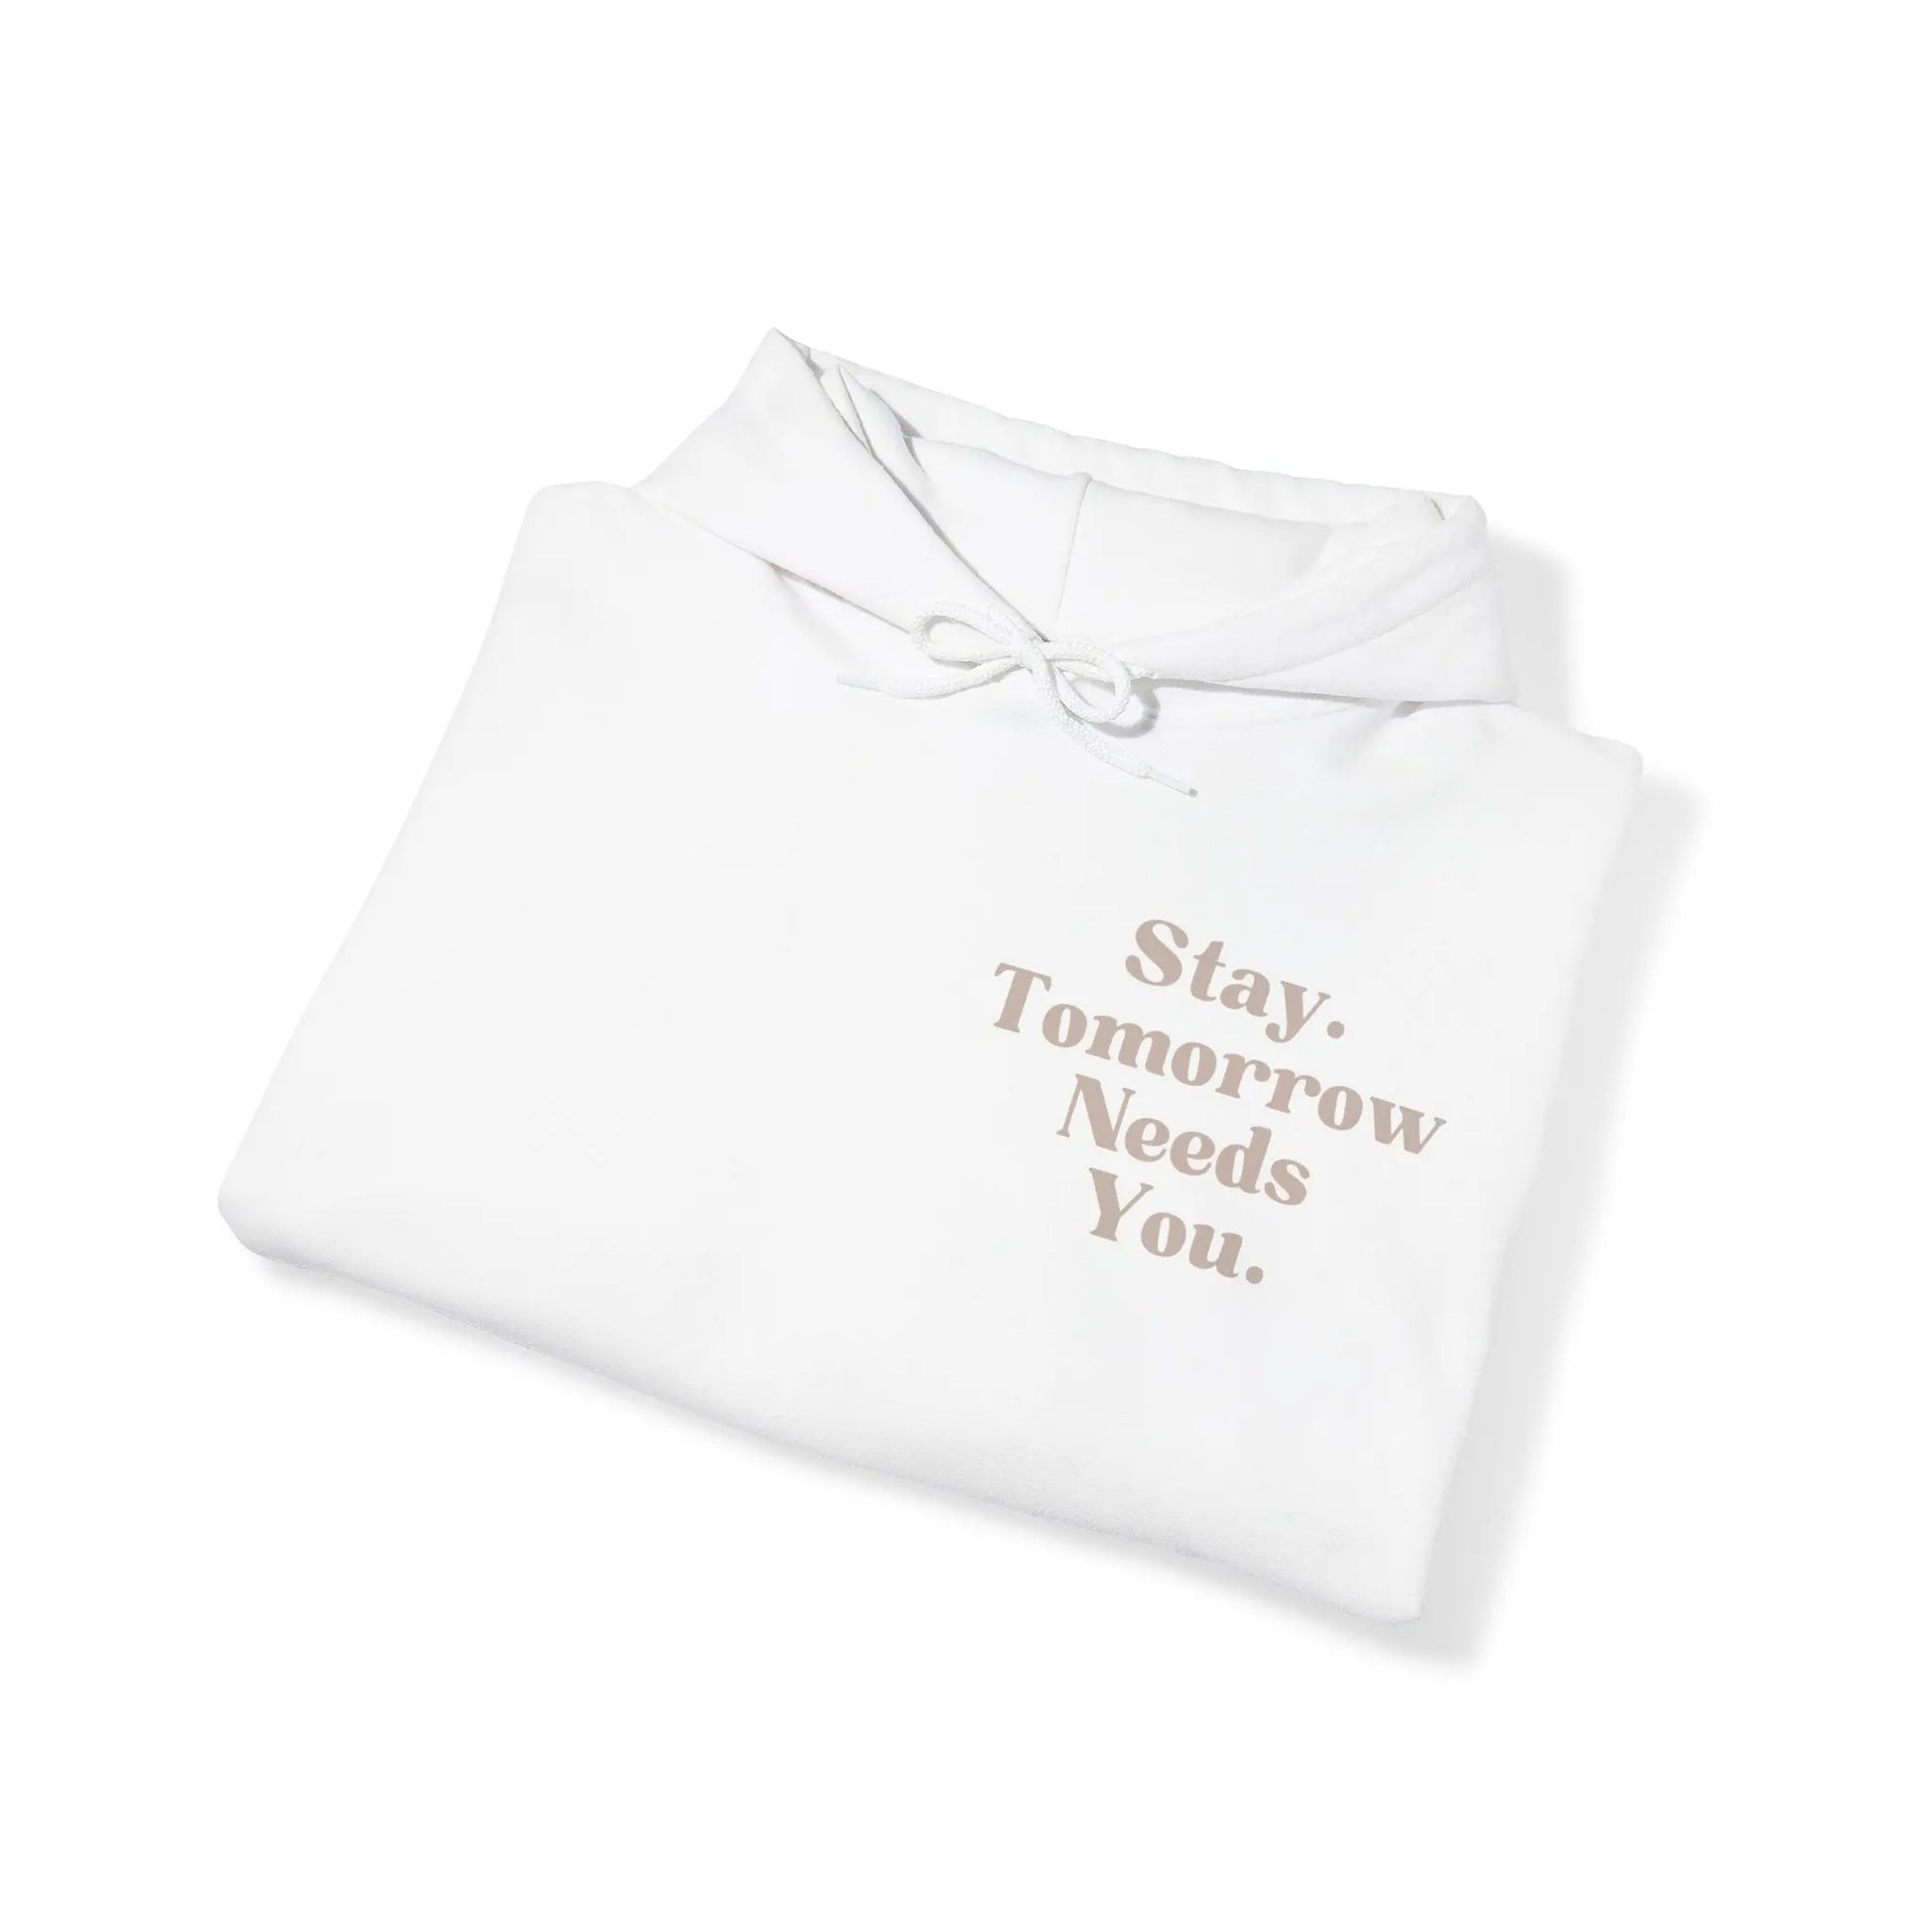 To the Person Behind Me Stay Tomorrow Needs You Hooded Sweatshirt - Spread positivity this Mother's Day and Father's Day, supporting mental health awareness